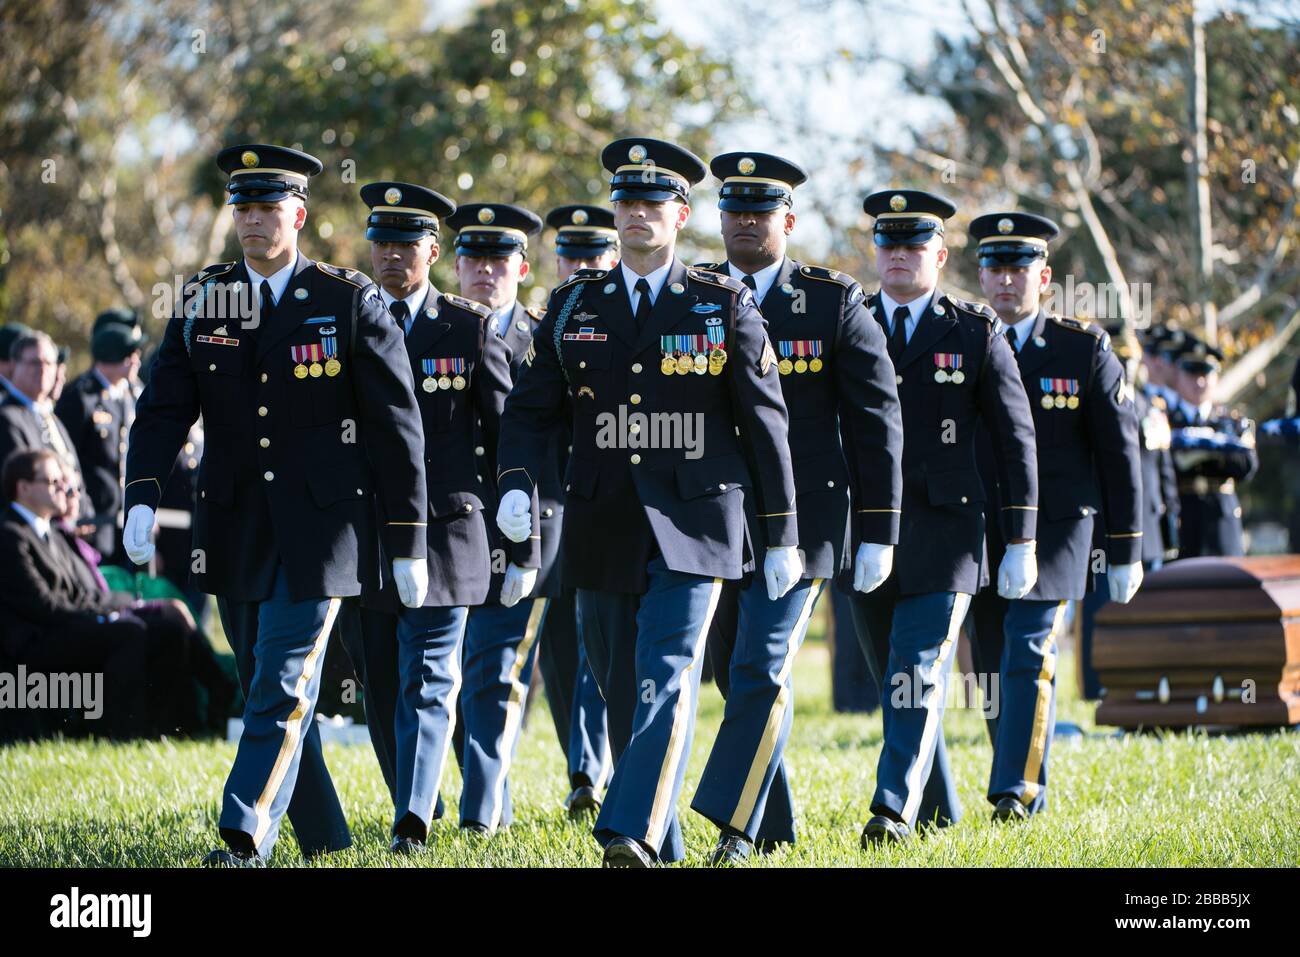 'The U.S. Army Honor Guard, The 3d U.S. Infantry Regiment (The Old Guard) Caisson Platoon, and The U.S. Army Band, “Pershing’s Own”, conduct the funeral of U.S. Army Staff Sgt. Bryan Black in Section 60 of Arlington National Cemetery, Arlington, Virginia, Oct. 30, 2017.  Black, a native of Puyallup, Washington, was assigned to Company A, 2nd Battalion, 3rd Special Forces Group (Airborne) on Fort Bragg, North Carolina when he died from wounds sustained during enemy contact in the country of Niger in West Africa, Oct. 4, 2017.  Ryan McCarthy, acting secretary, U.S. Army; Gen. Mark Milley, chief Stock Photo